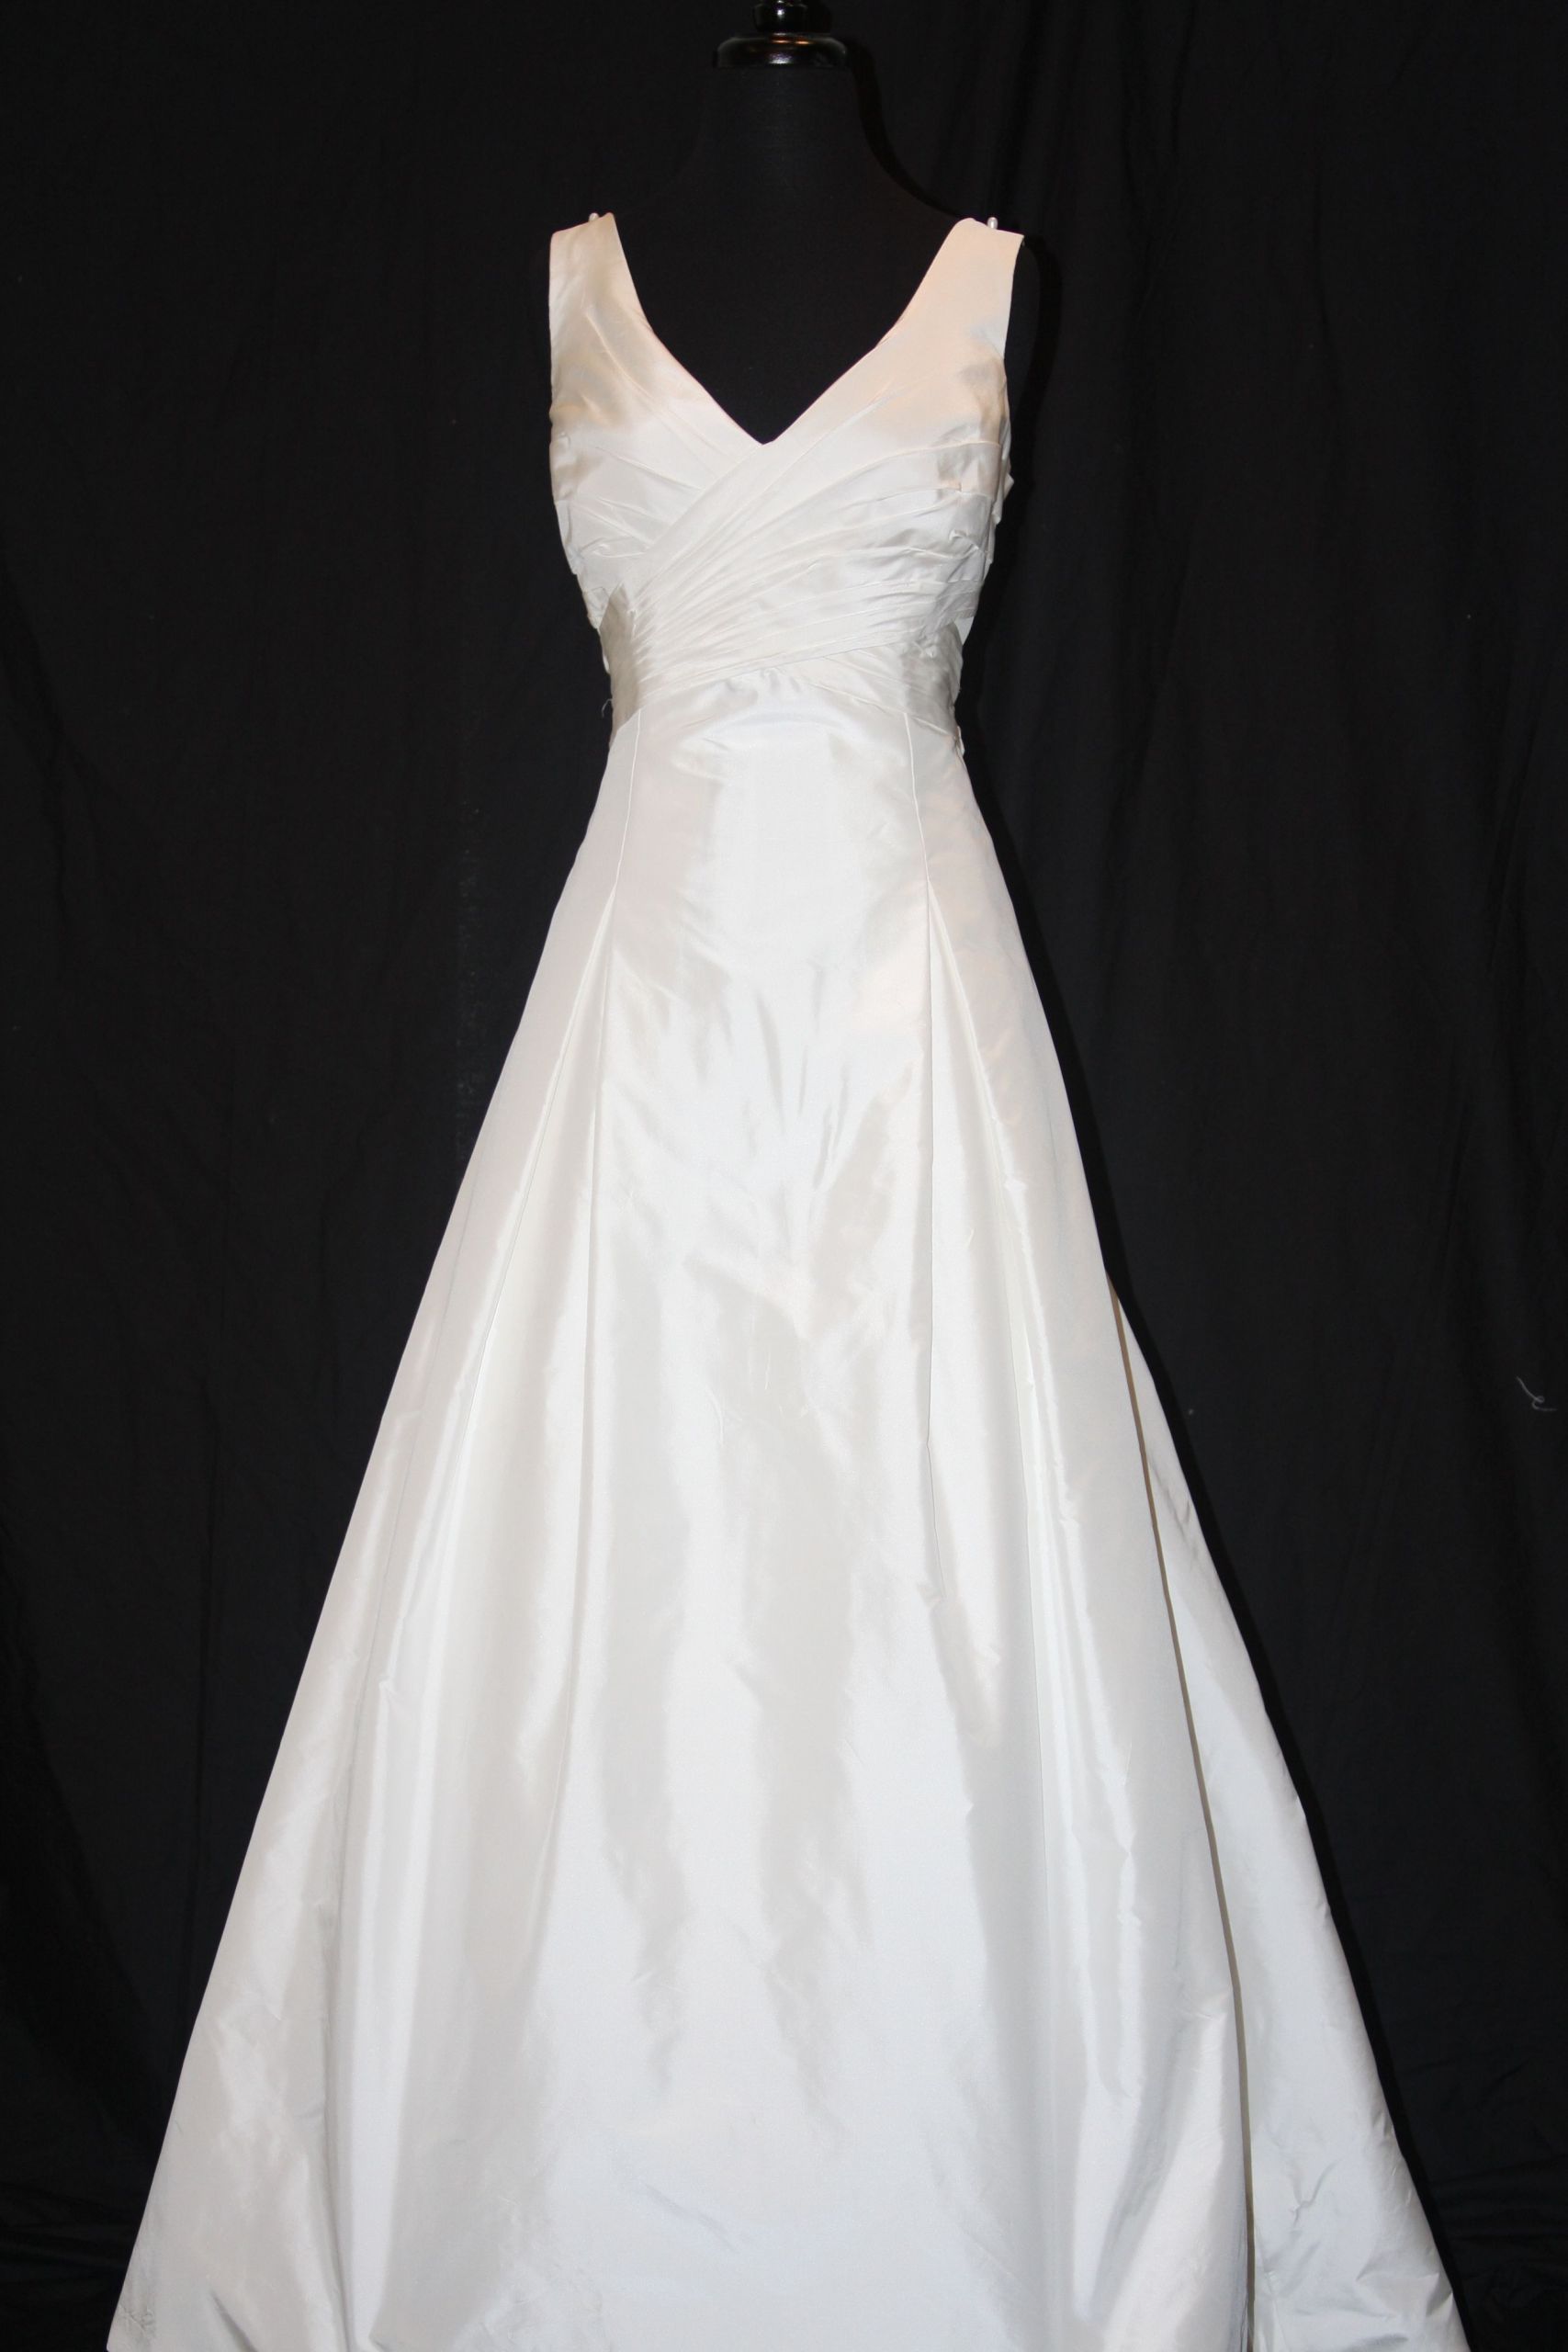 Wedding Dress Resale
 consignment wedding gowns in atlanta